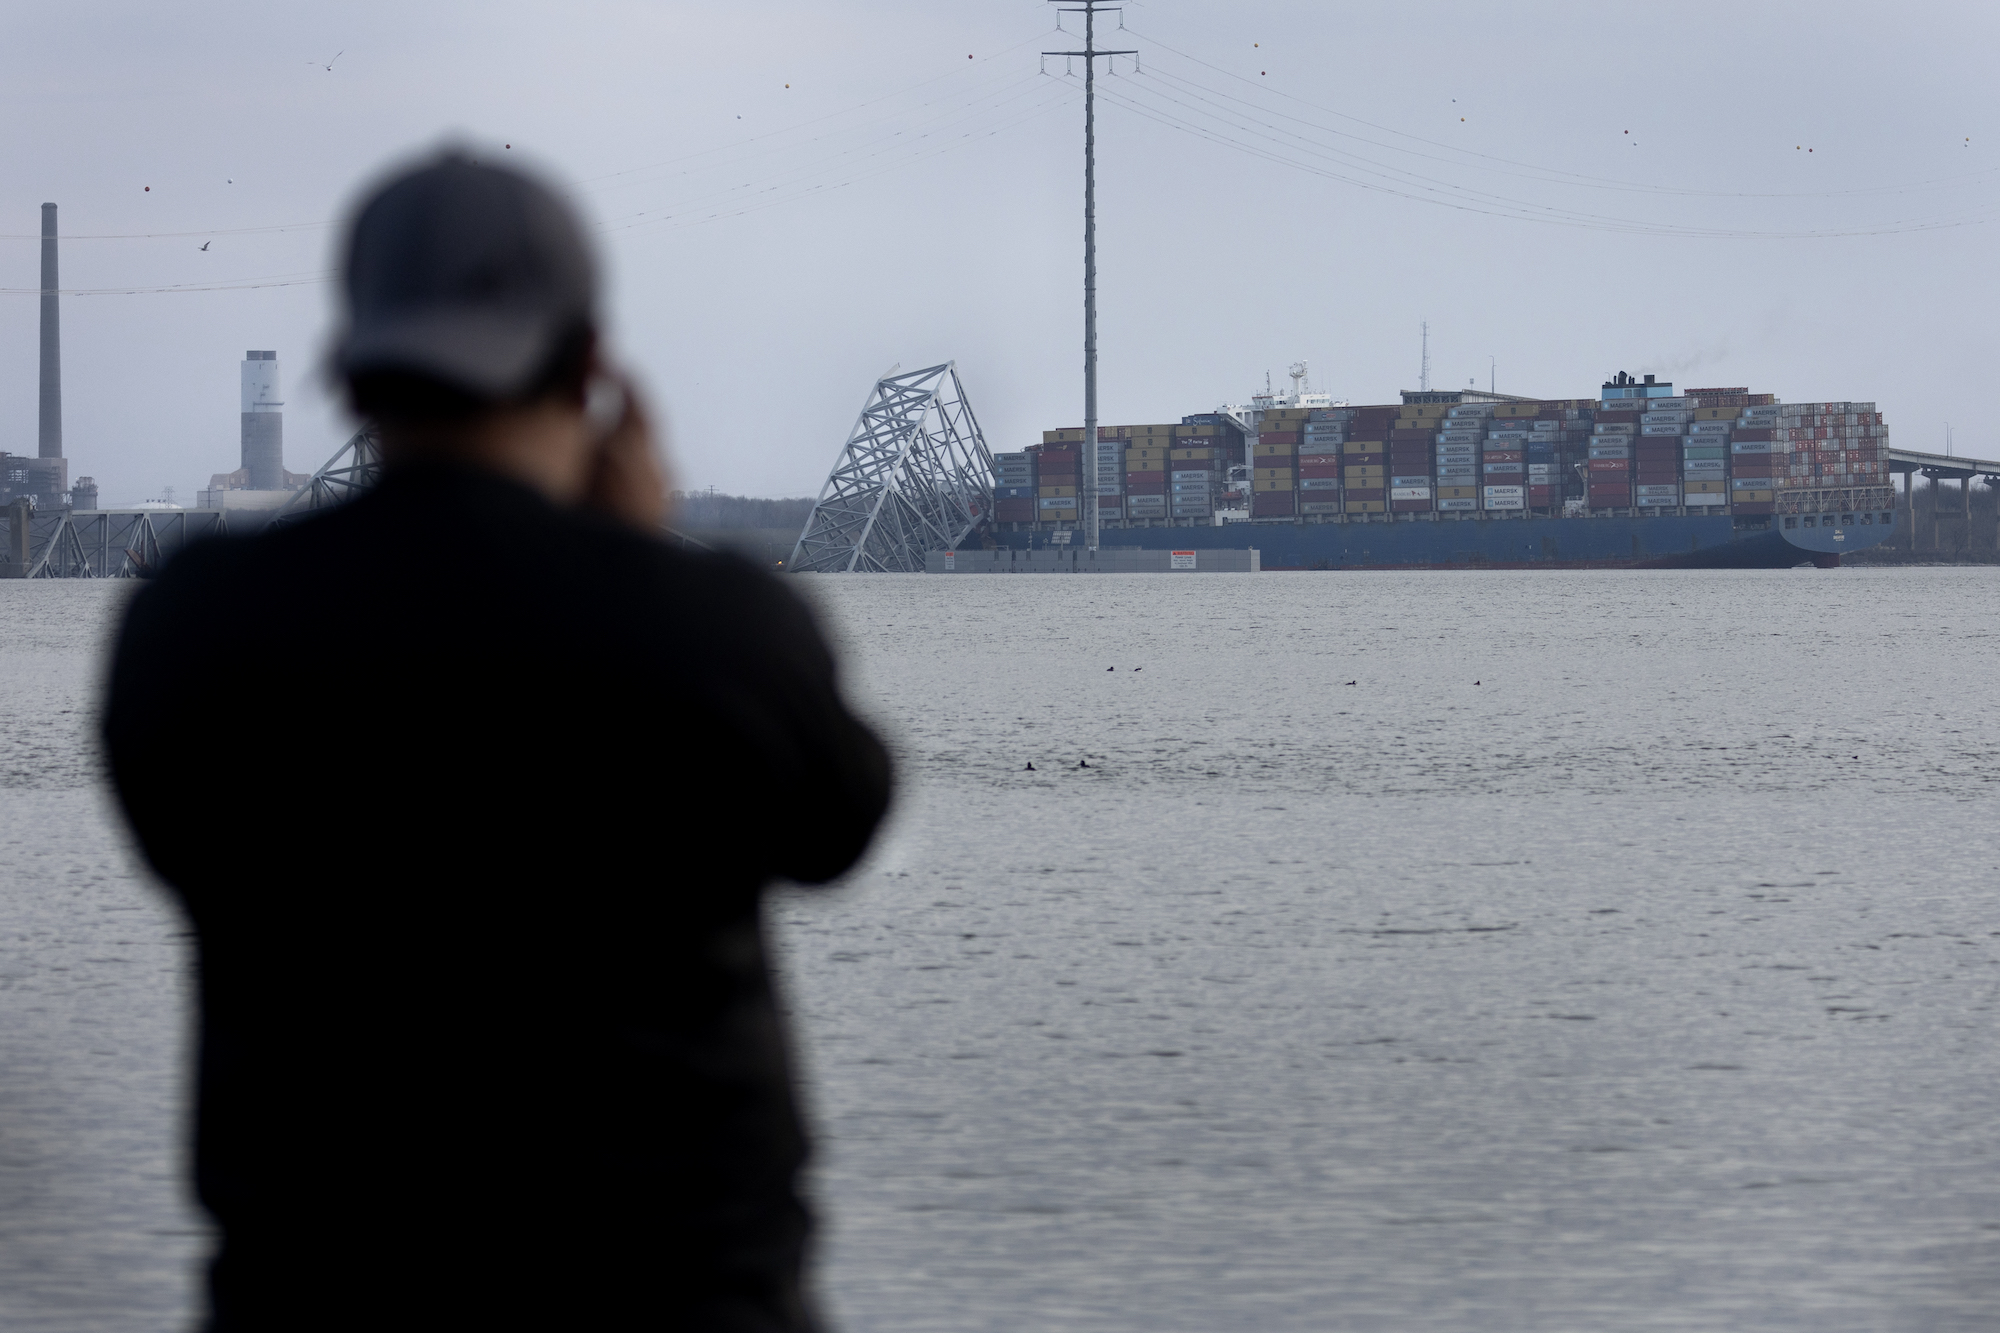 A man tries to photograph the cargo ship that hit and collapsed the Francis Scott Key Bridge in Baltimore on Tuesday.